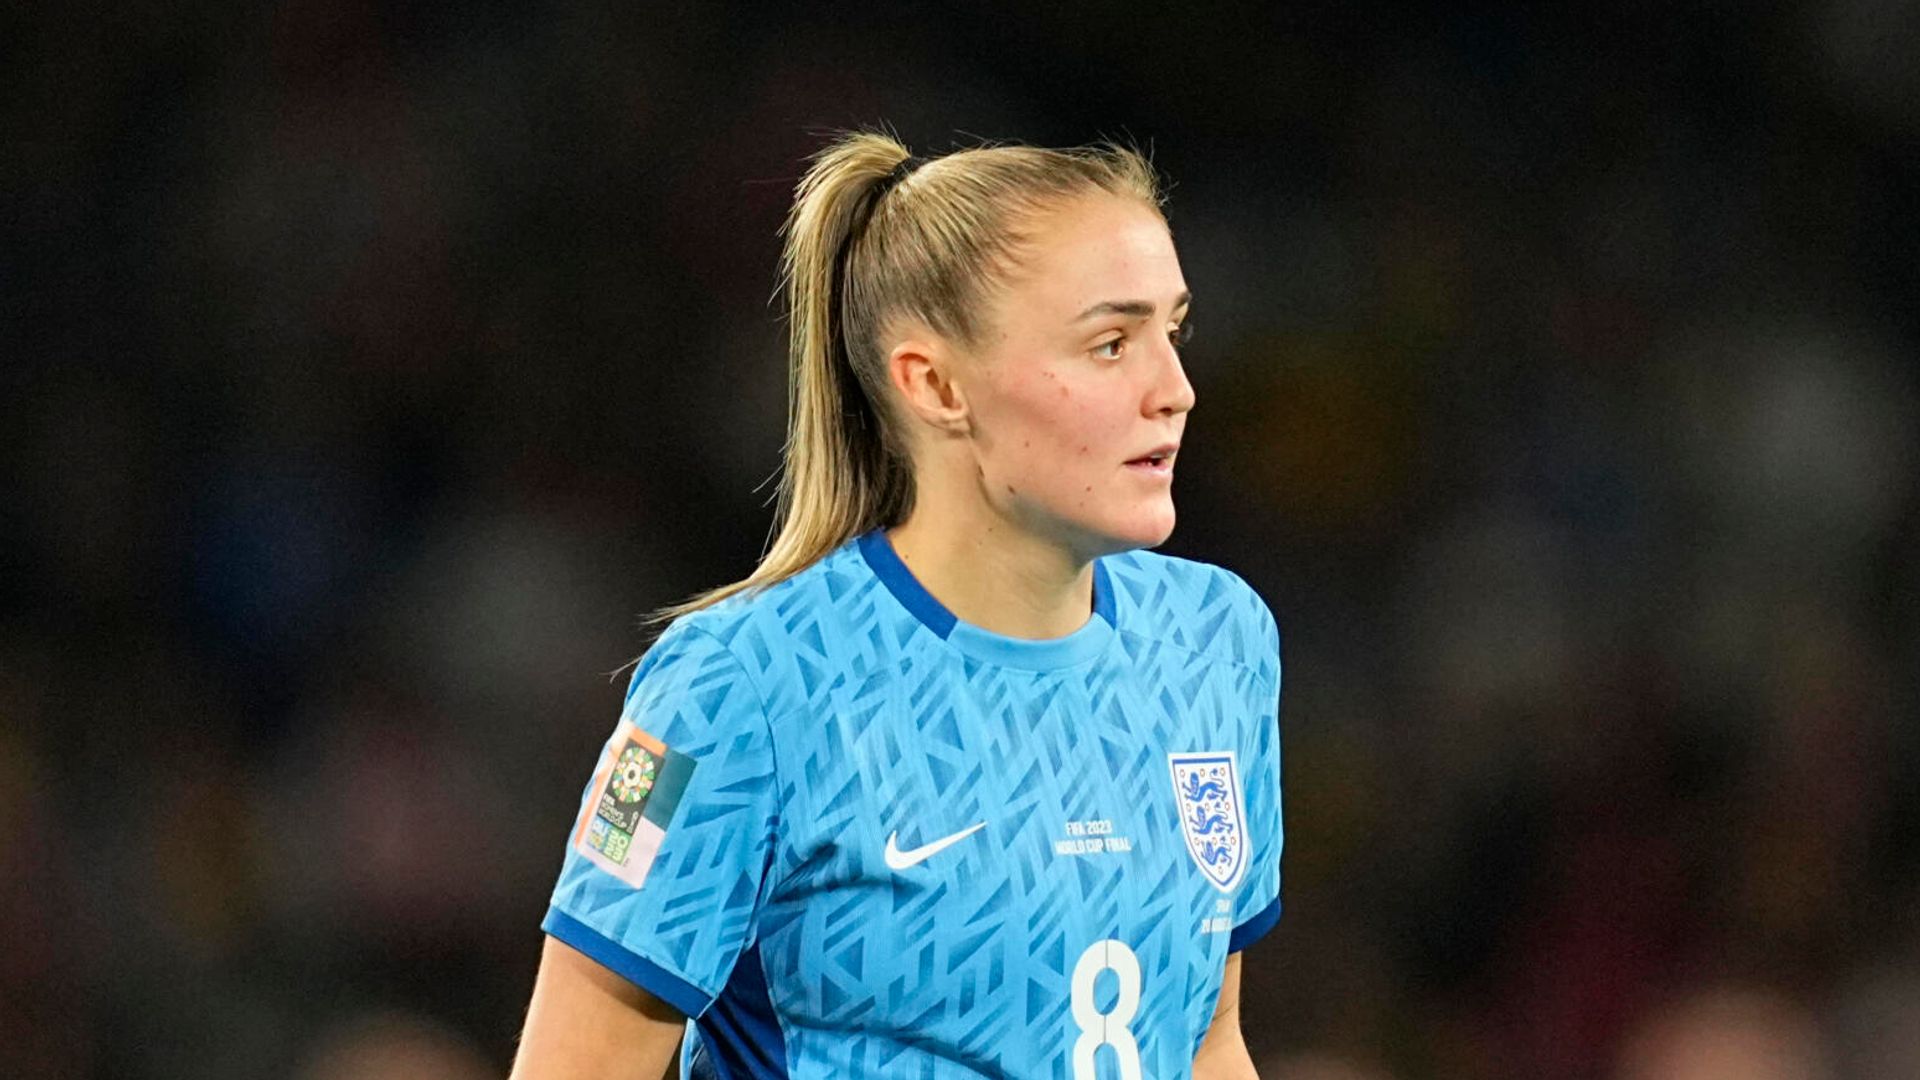 Ballon d'Or should consider women's scheduling in future, says Stanway